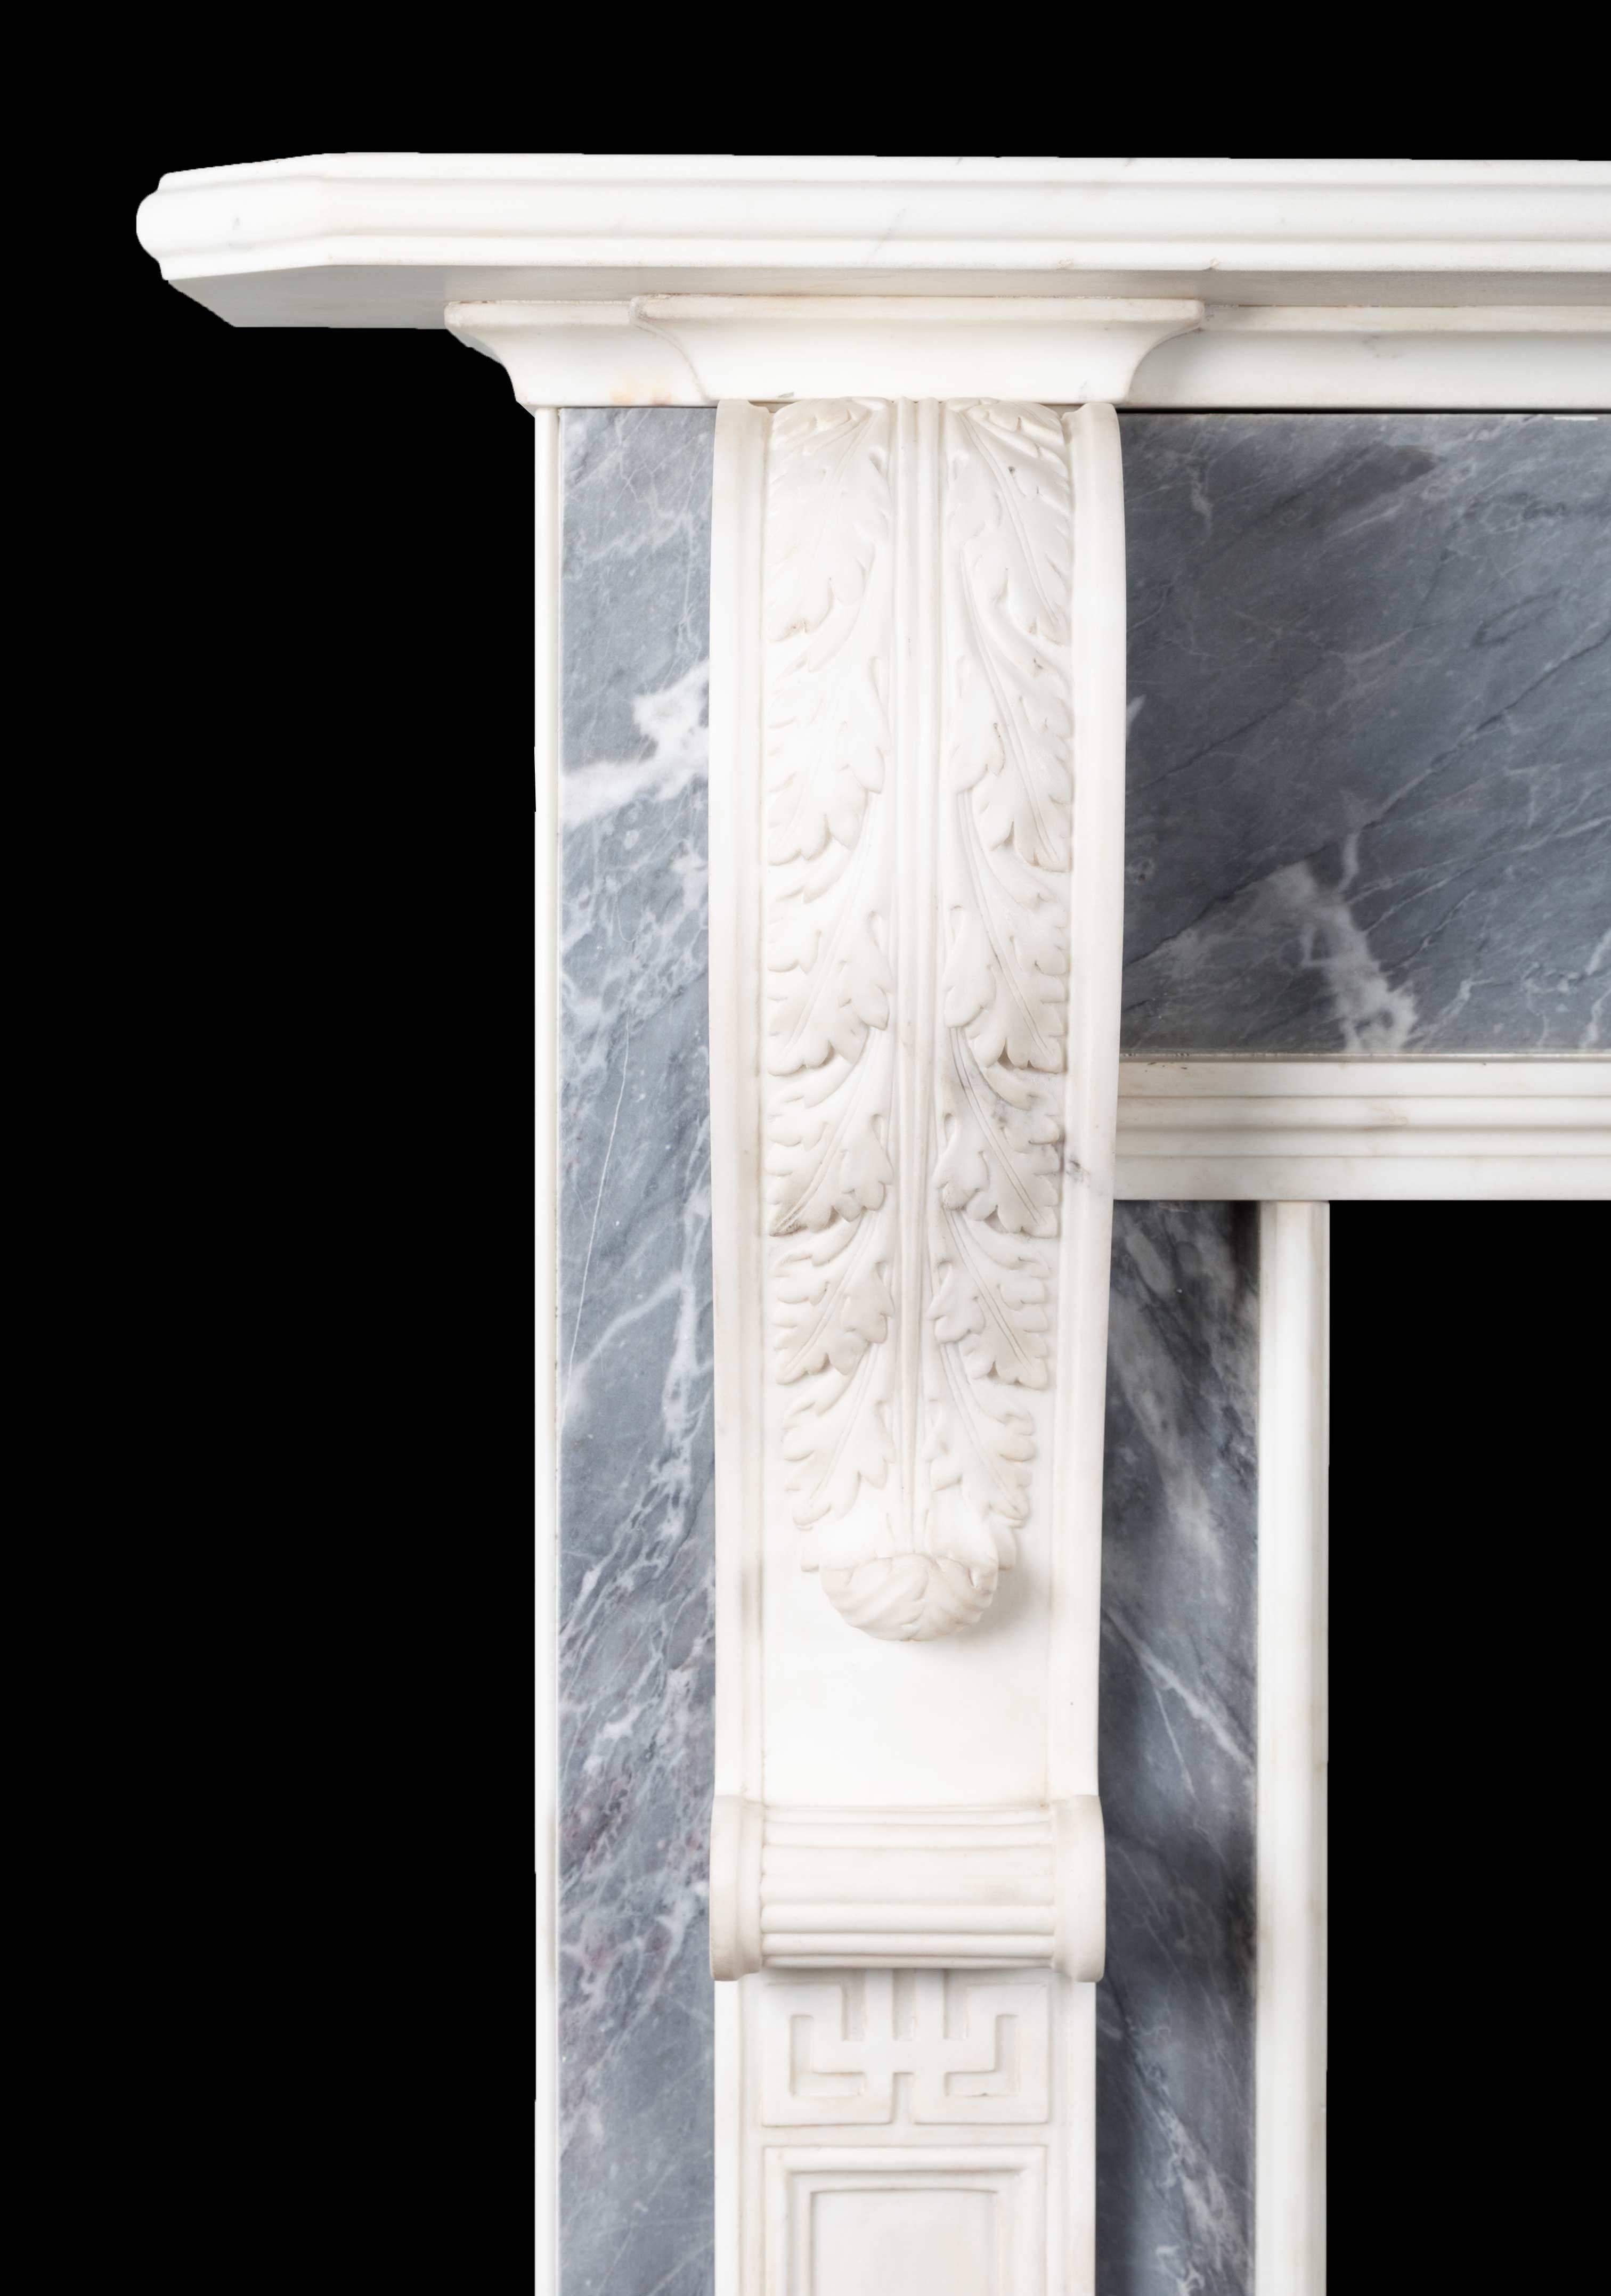 A pair of antique dove grey and white statuary marble fireplaces from the late Gerogian period. The long elegant acanthus carved corbels with recessed pilasters below, support a moulded and chamfered edge mantelpiece. The exquisitely carved centre